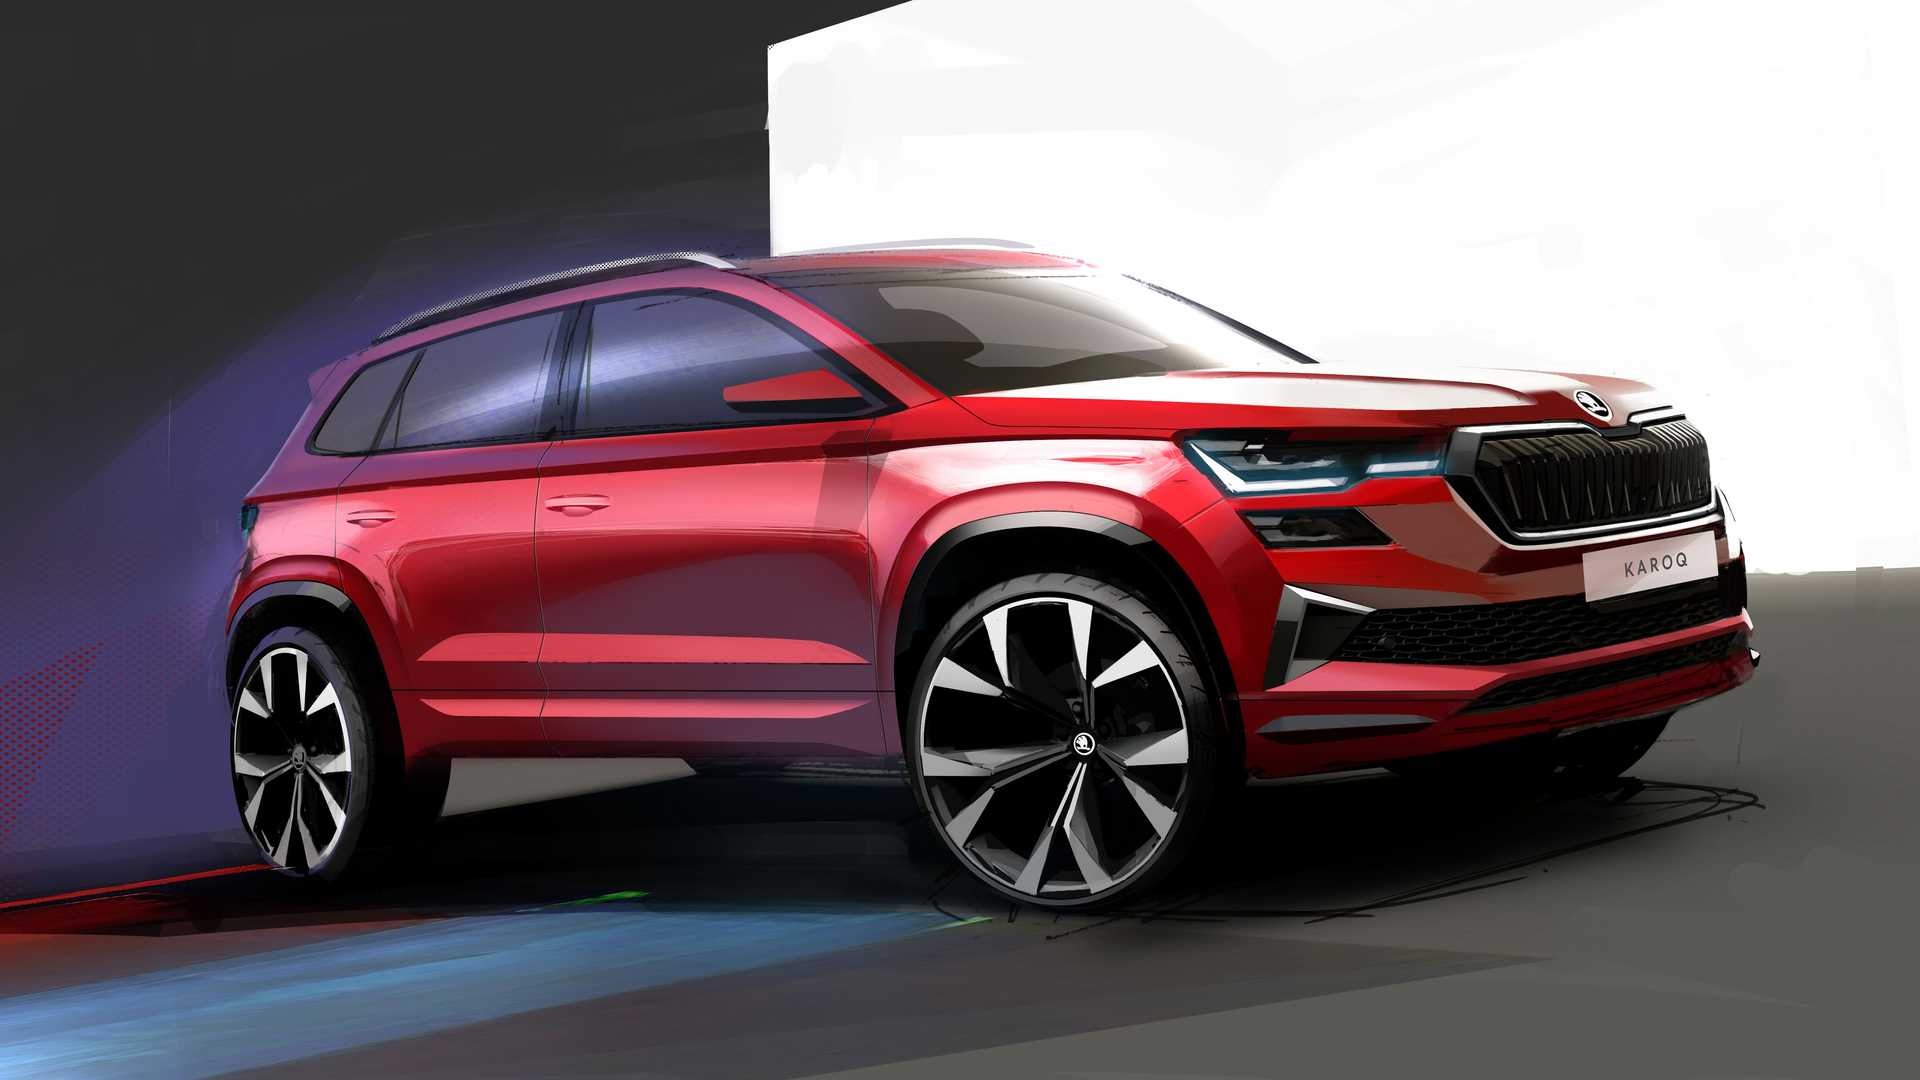 Skoda Karoq 2021 facelift, Bold and dynamic, Upgraded features, Enhanced driving experience, 1920x1080 Full HD Desktop